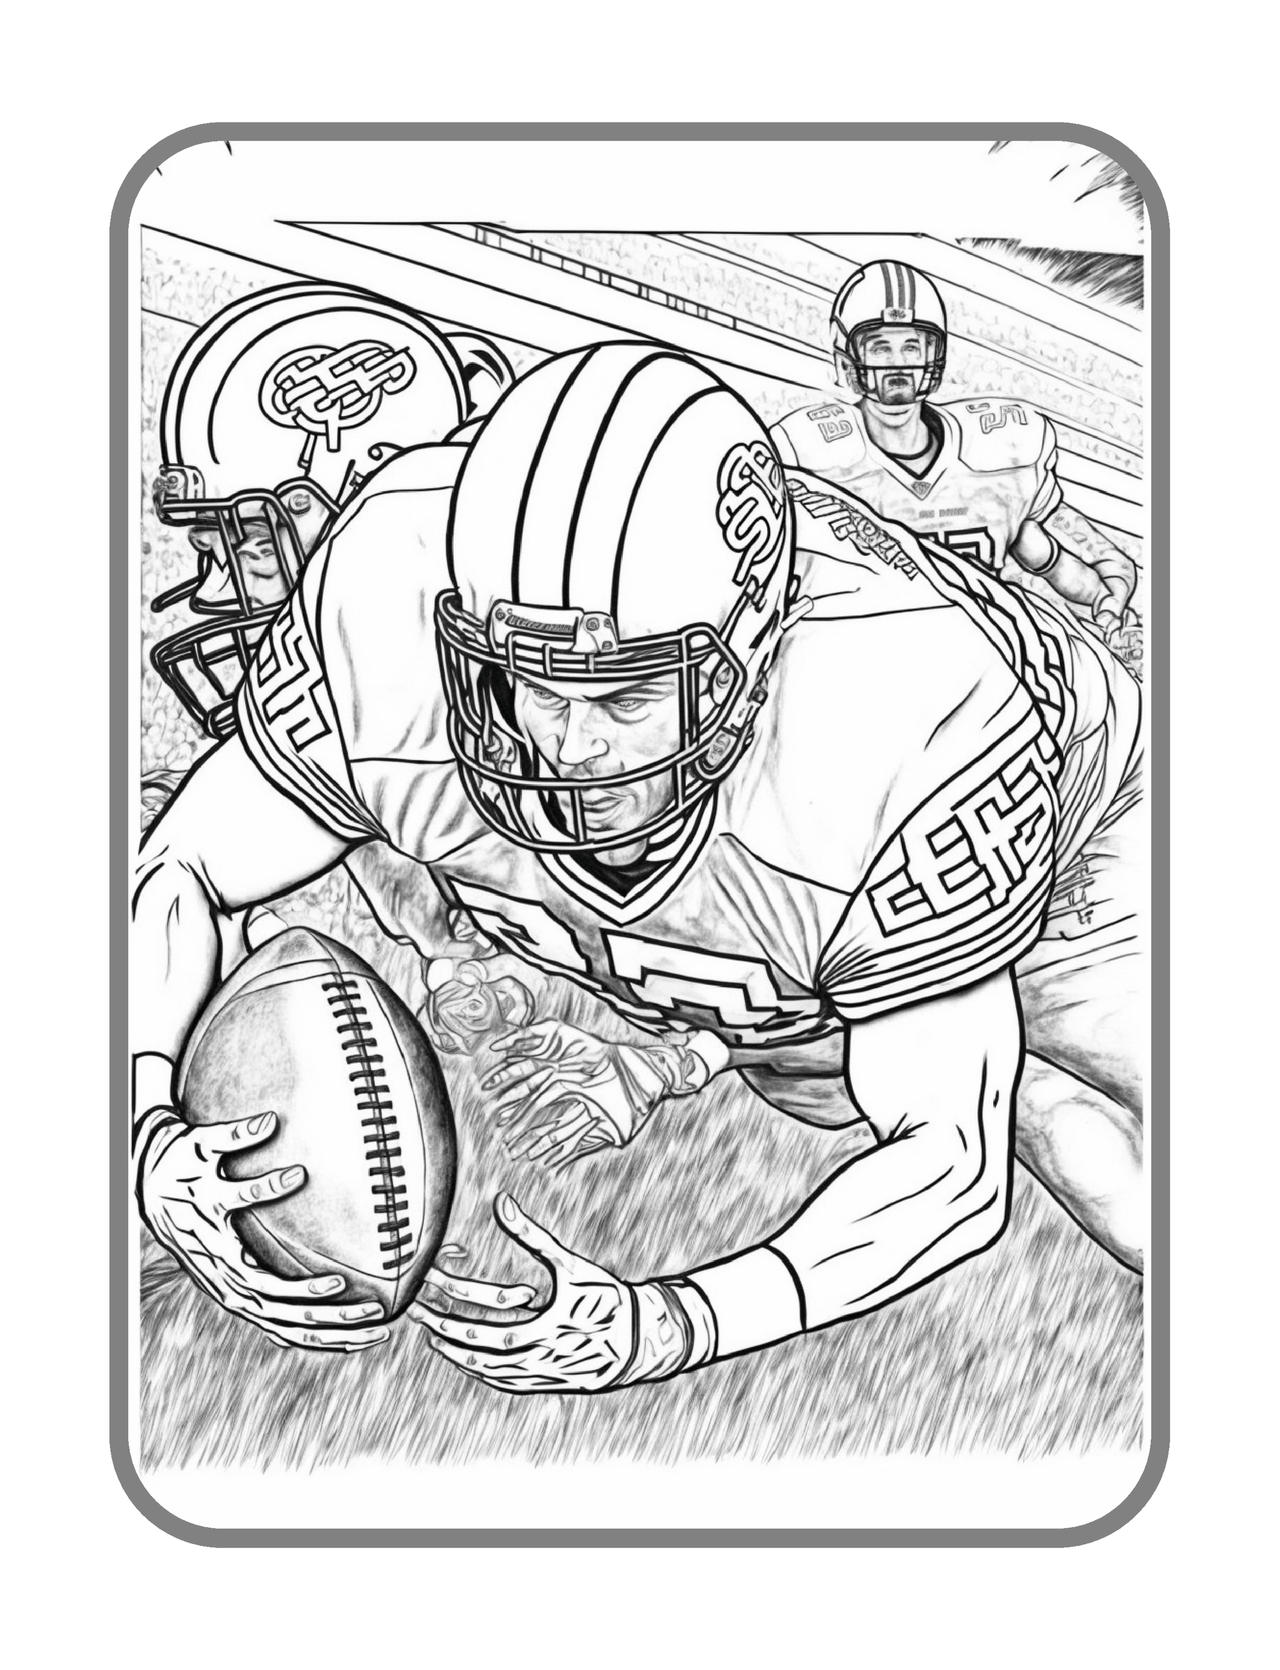 Football Coloring Book: Sports illustrated kids books football. Football  coloring books for kids ages 8-12.